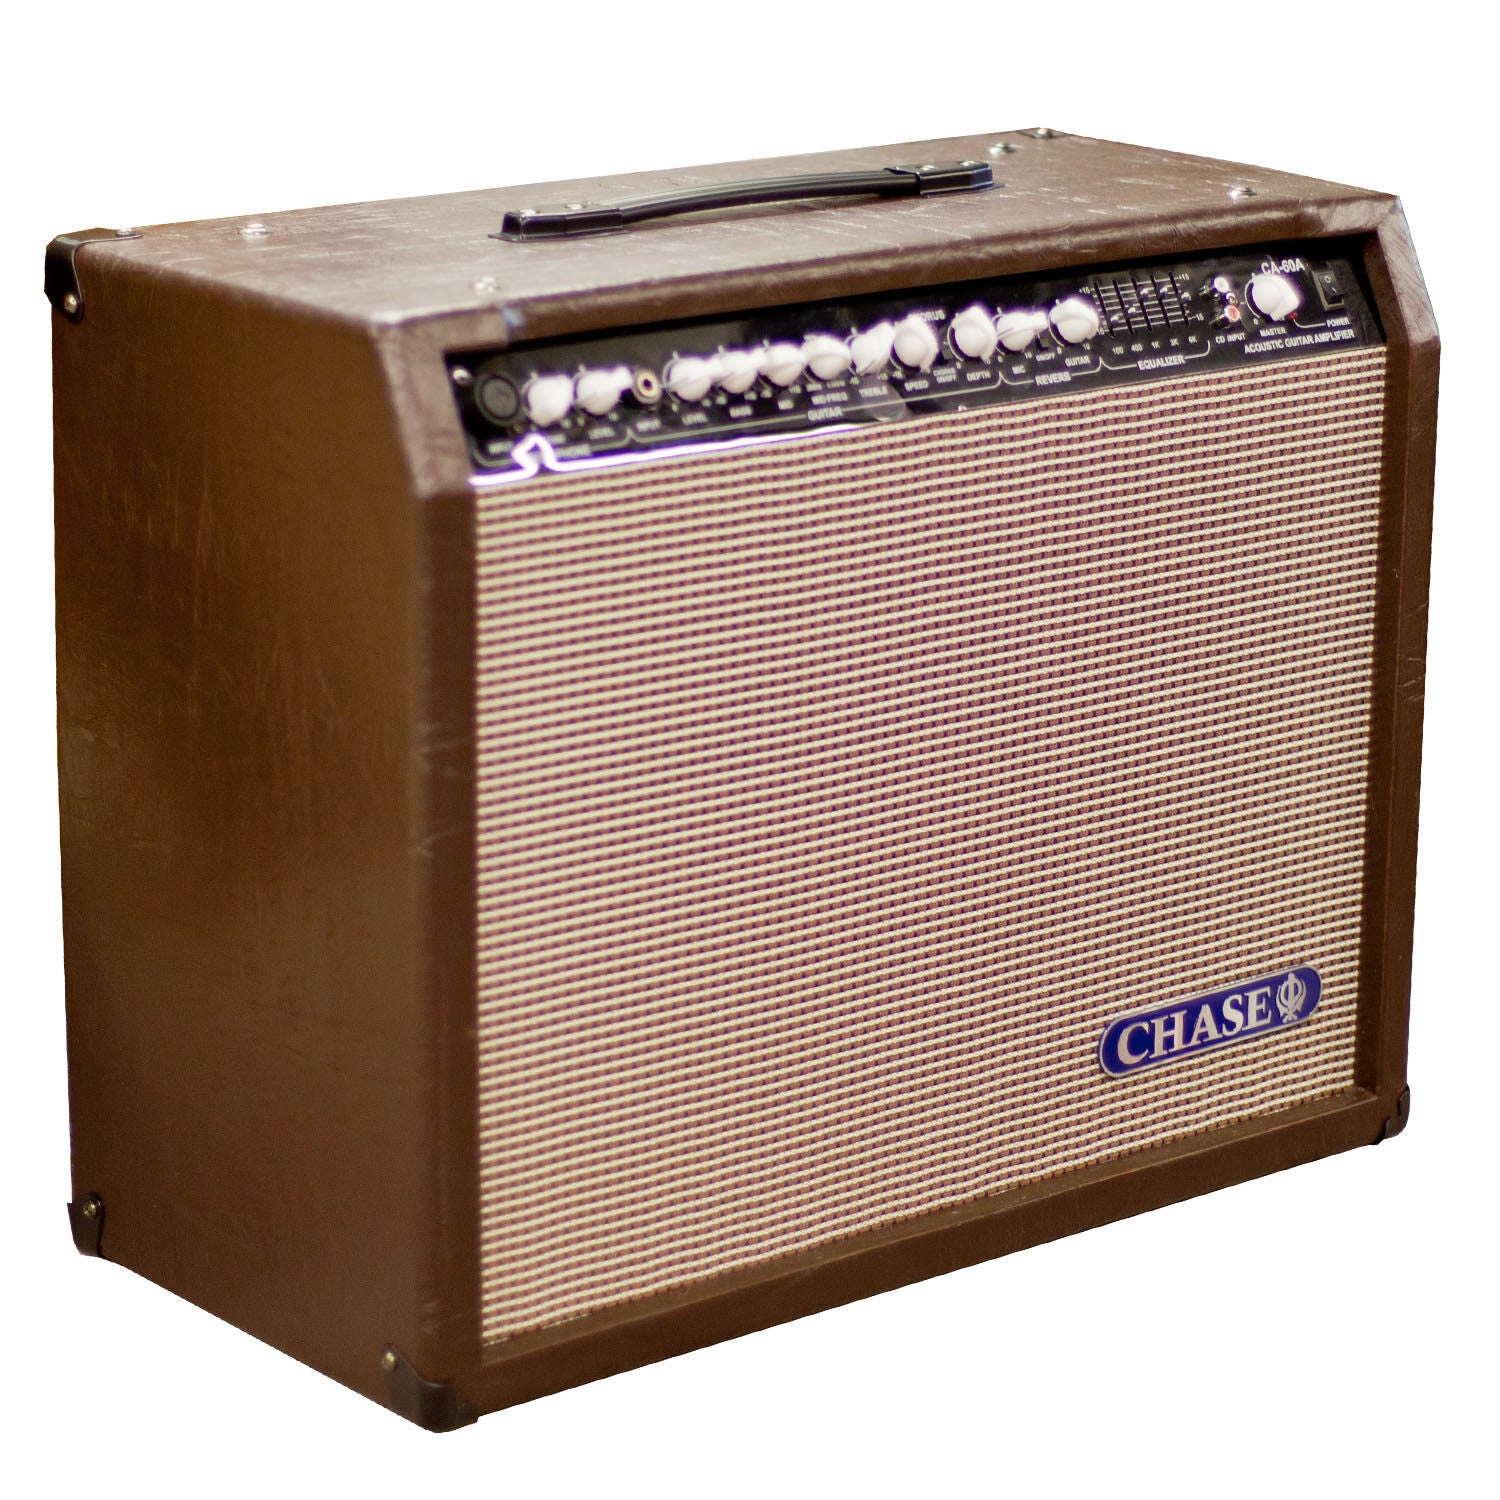 Chase CA60A Deluxe 60W Acoustic Guitar Amplifier | Combo Powerful Amplifier For Acoustic Guitar